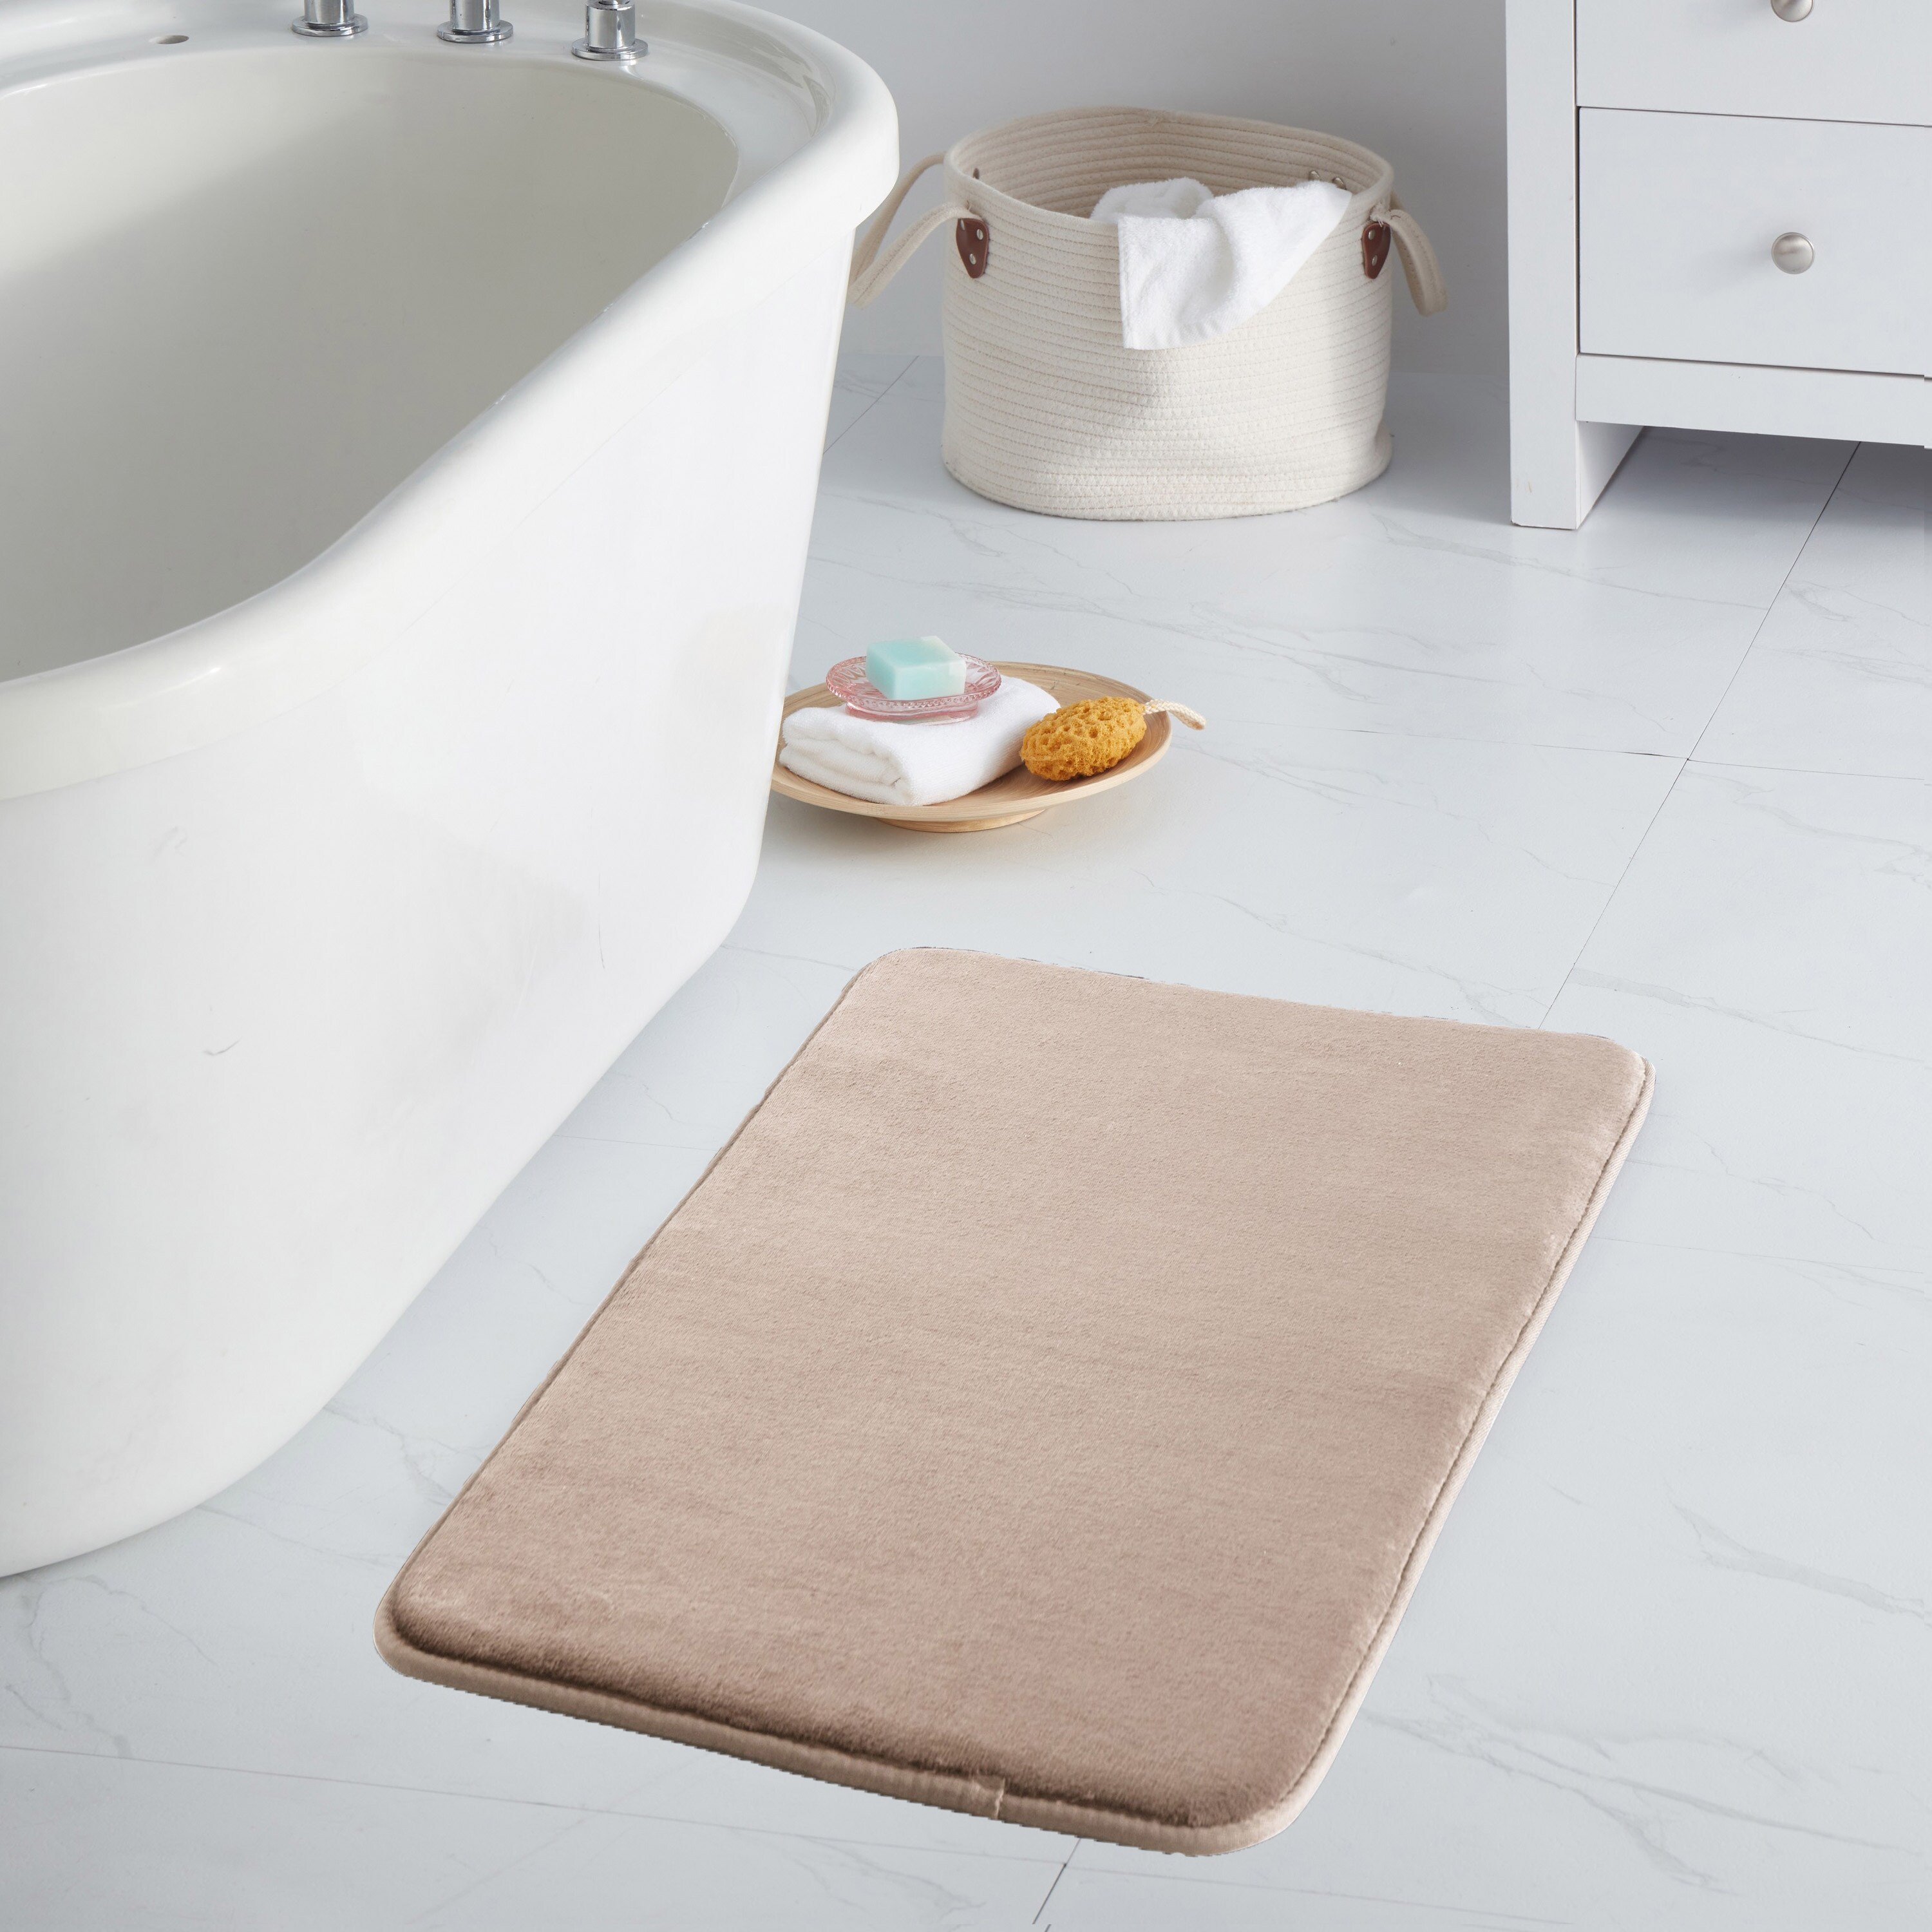 https://ak1.ostkcdn.com/images/products/is/images/direct/fa2e7504dd482981aa6f83a473c20686bce33892/Sweet-Home-Collection-Memory-Foam-No-Slip-Back-Bath-Mats.jpg